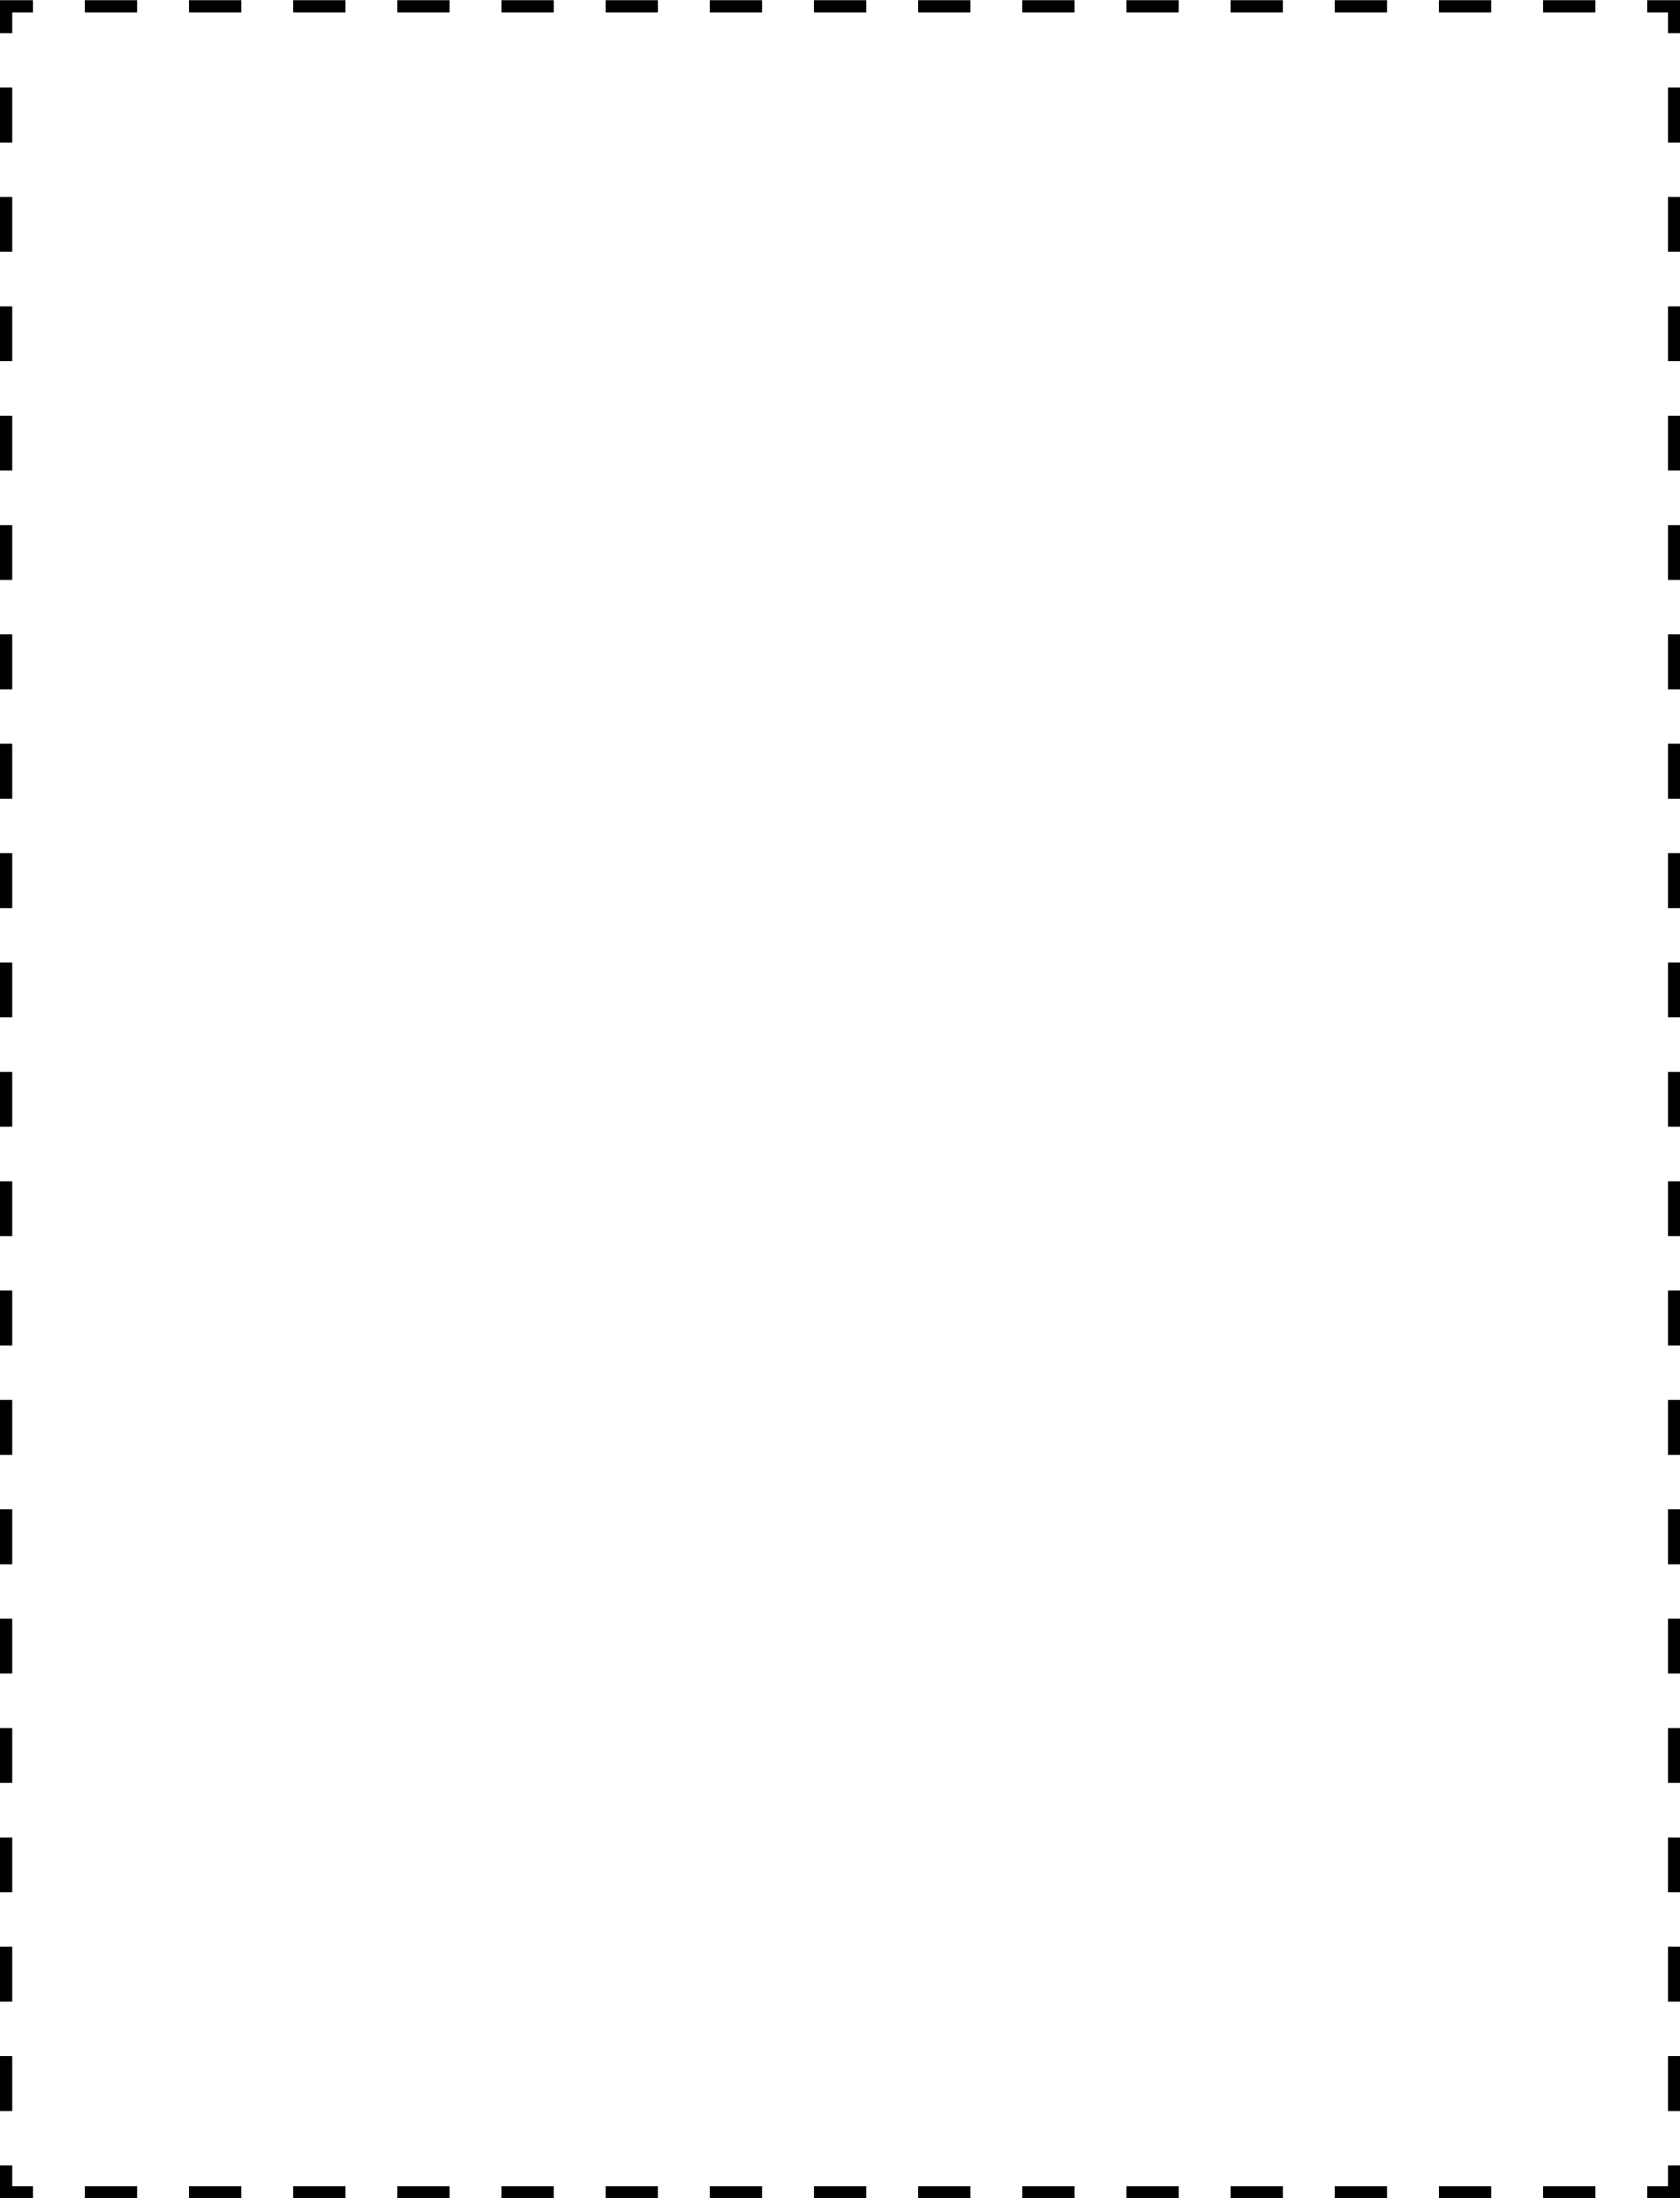 2914-coupon-outline-4x5-k.png